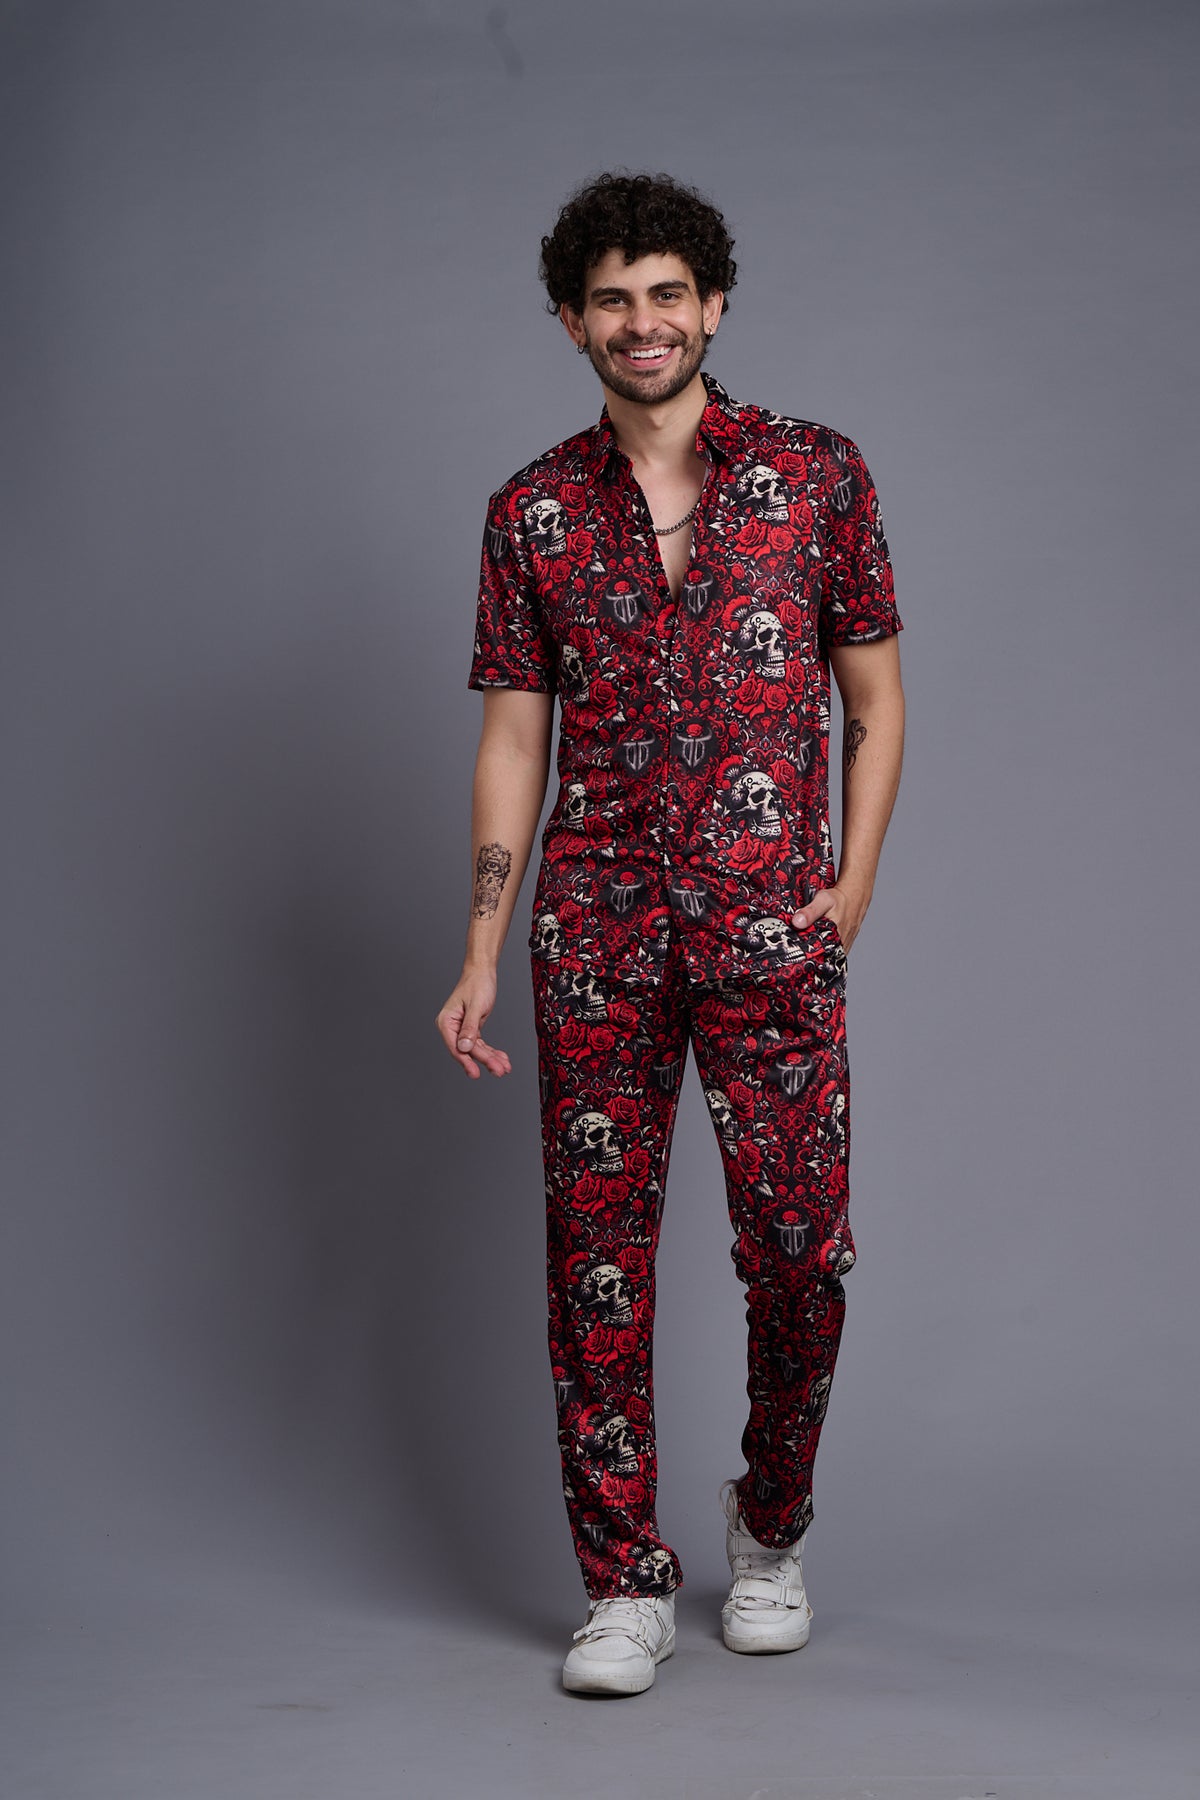 Skull and Rose Printed Red Shirt With Pant Co-Ord Set For Men